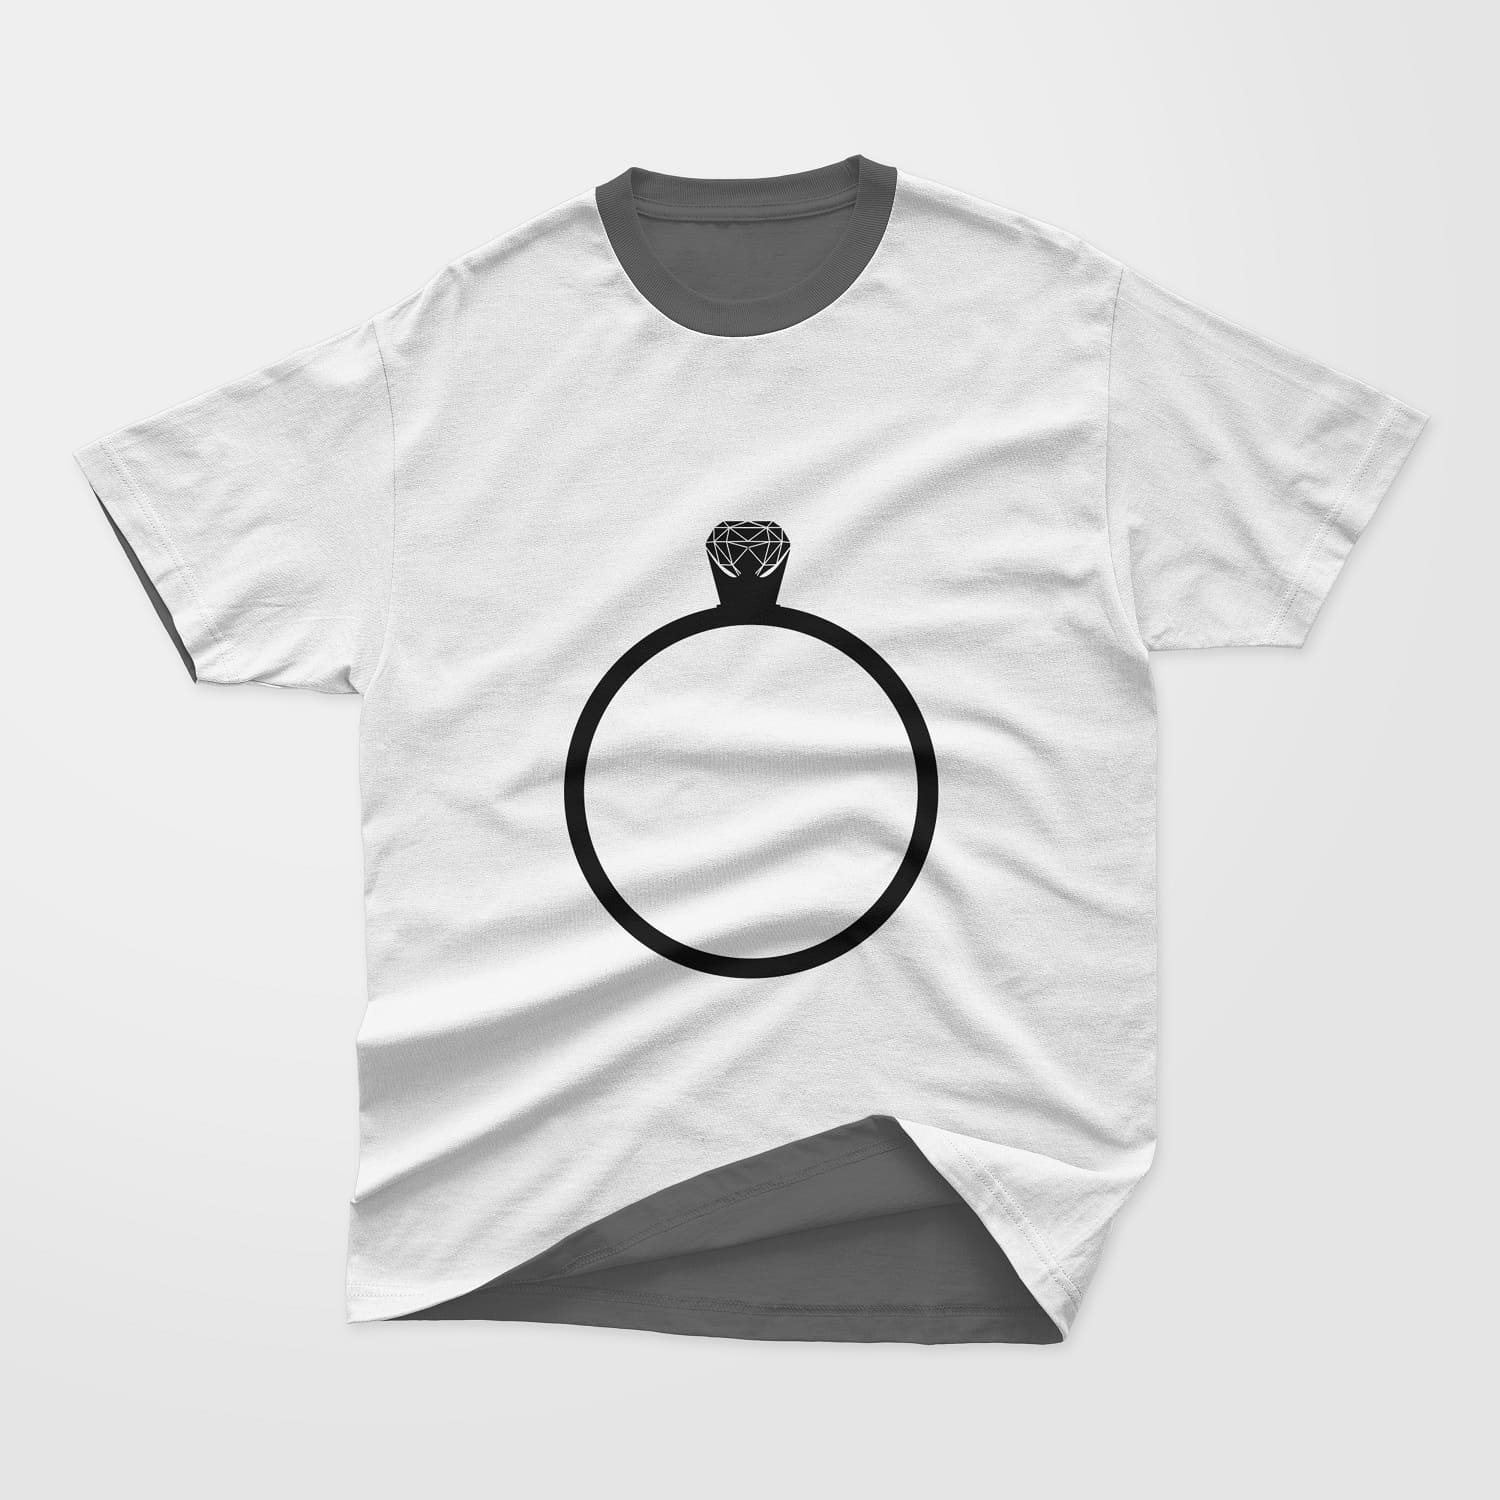 Silhouette image of a wedding ring with a small jewel on a light t-shirt.